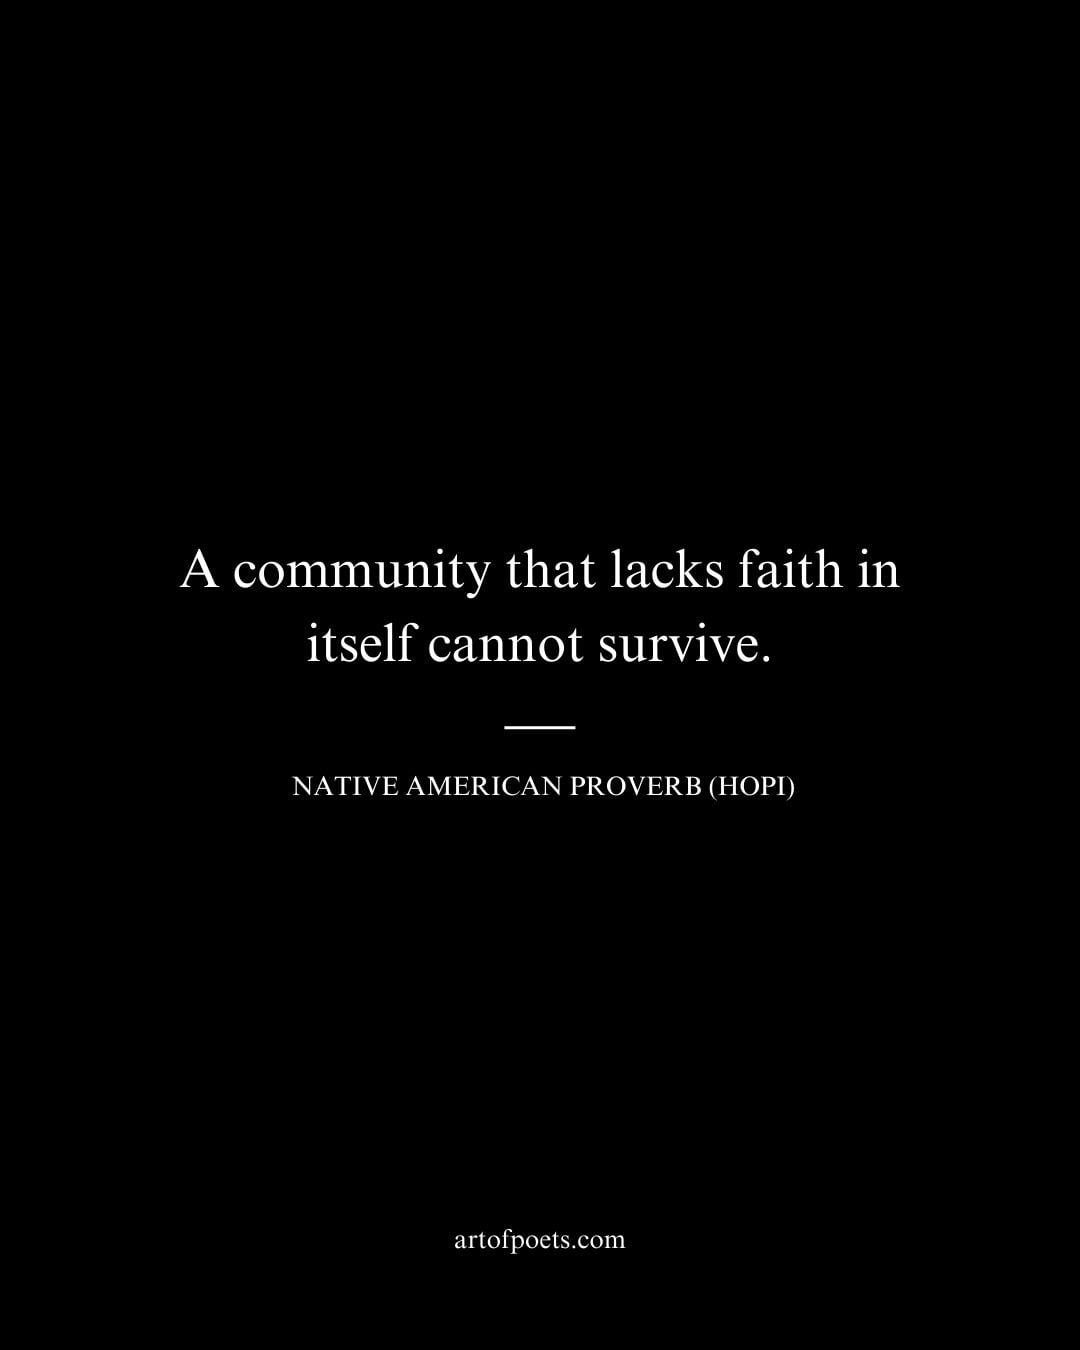 A community that lacks faith in itself cannot survive